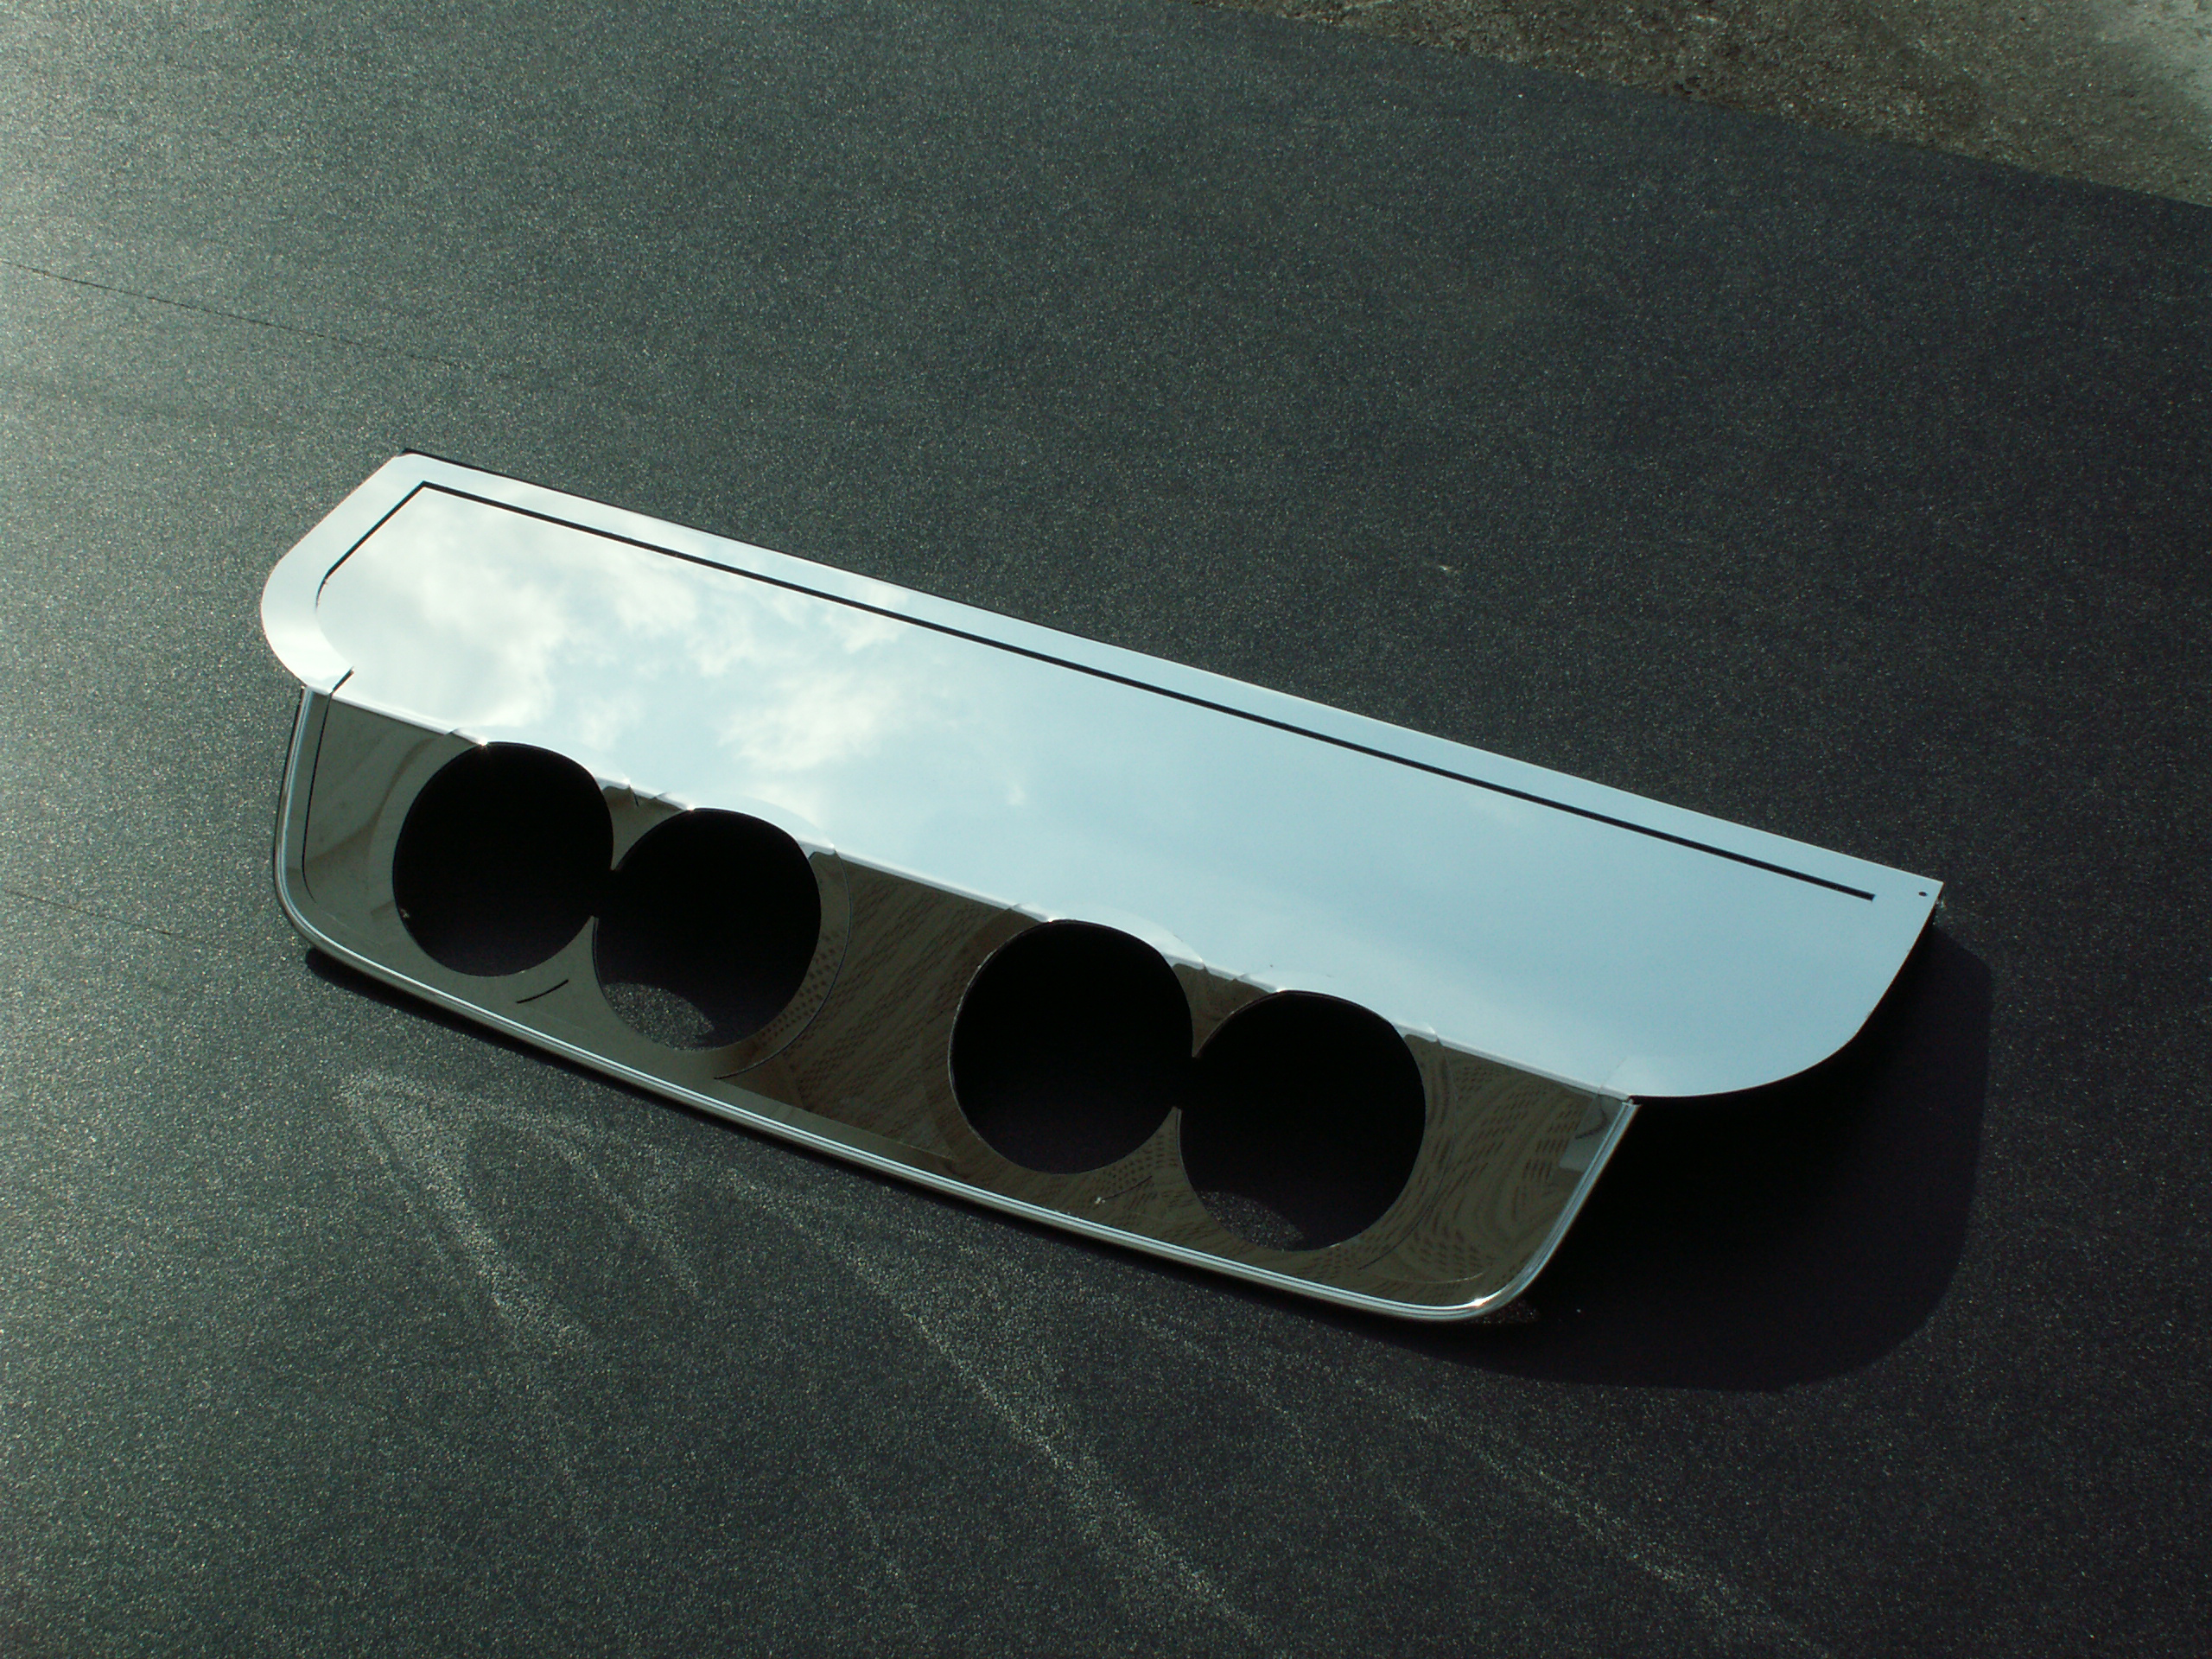 2005-2013 C6 Corvette, Exhaust Filler Panel BB RTE 66 4" Round Quad Polished, Stainless Steel